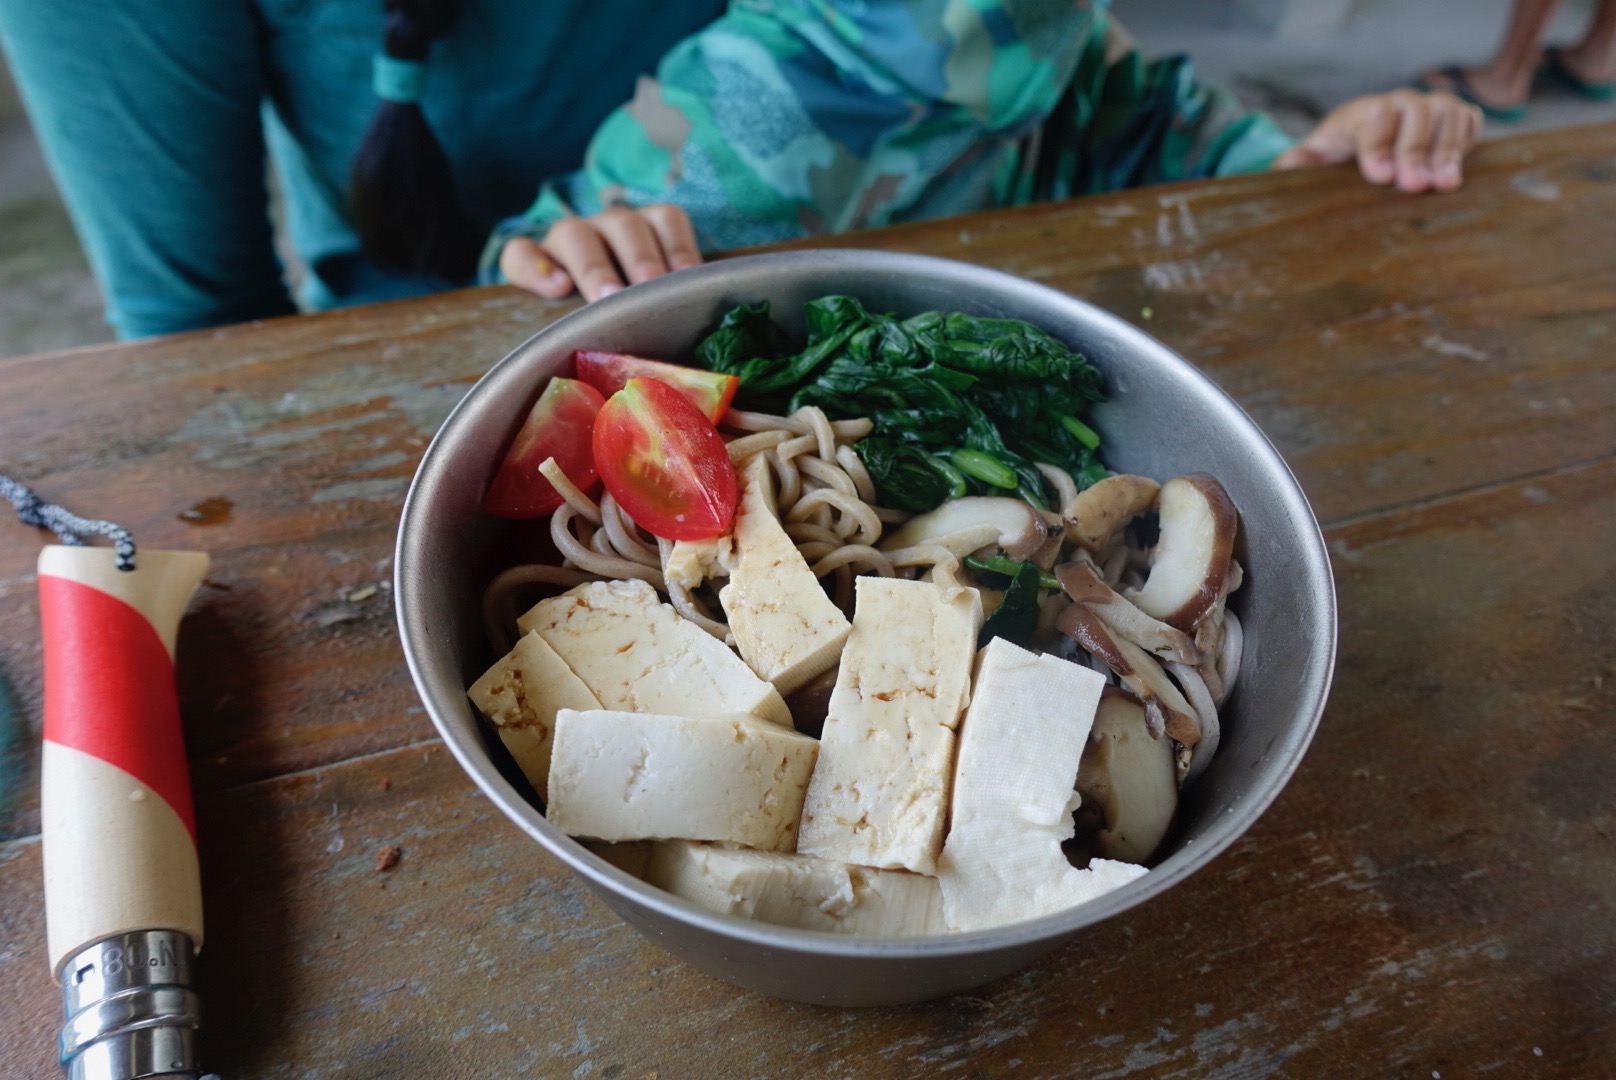 A close up shows a bowl of soba noodles topped with steamed spinach, mushrooms, and tofu, and diced cherry tomatoes.